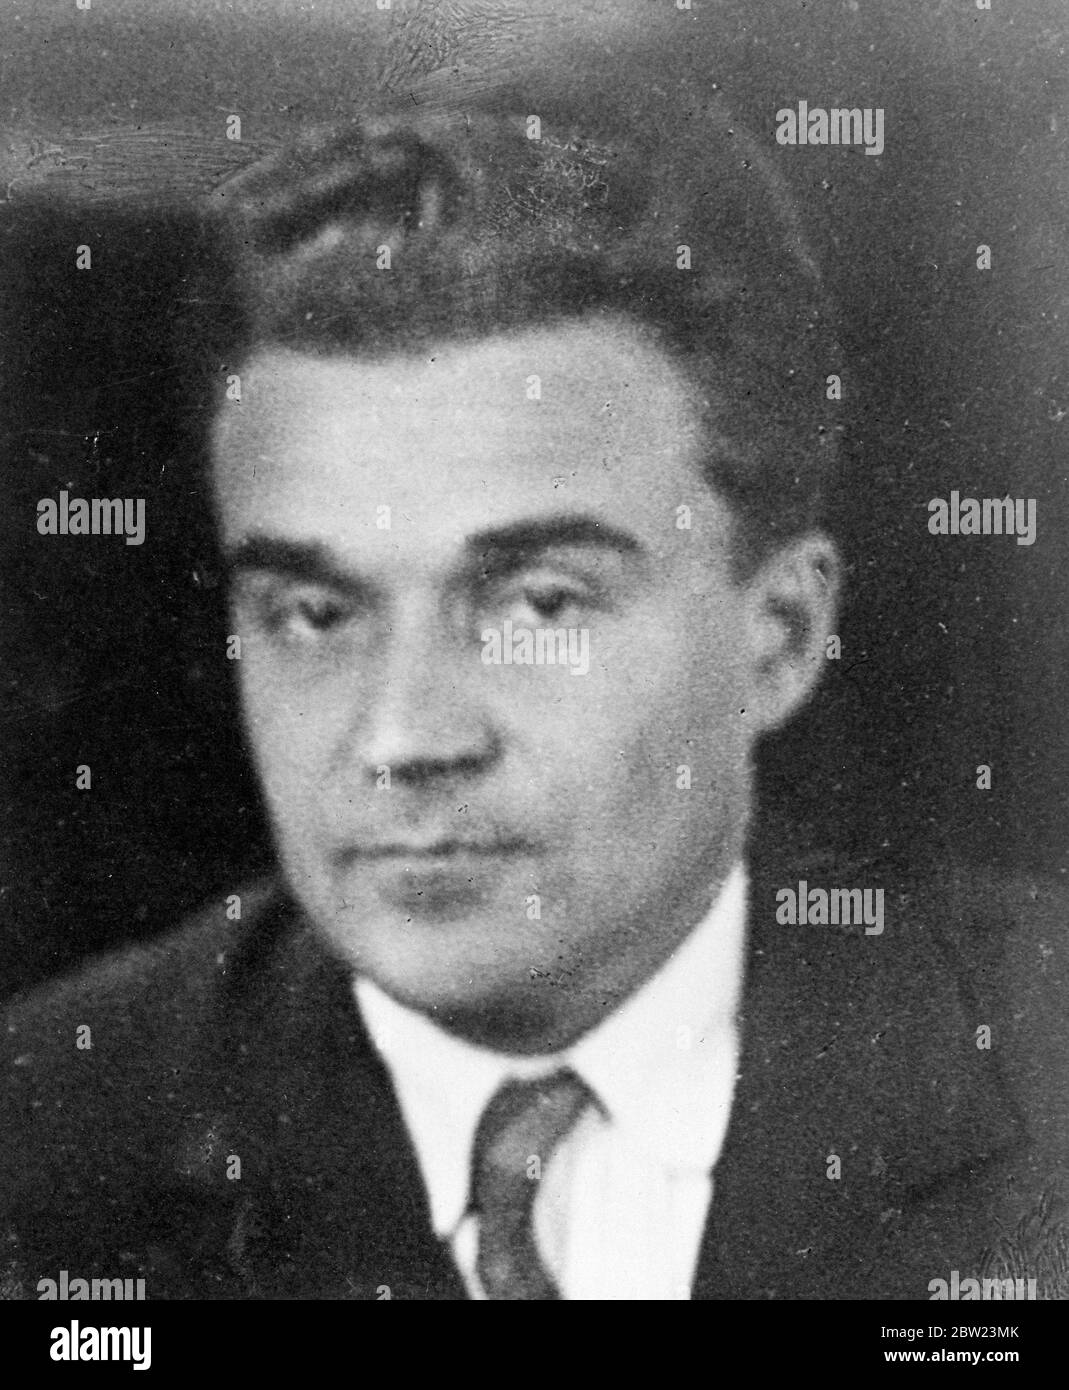 Missing Soviet diplomat found in Italy. Feared he would be shot. M Butenko, the Soviet Charge d'Affaires in Bucharest, Romania, who mysteriously disappeared when driving home from his Embassy several weeks ago, has been found in Rome. Butenko, who apparently went direct to Rome after the Soviet government had asked him to visit Moscow, said 'I knew I would be shot'. Owing to the disappearance, relations between the Soviet and Romania were strained. 16 February 1938 Stock Photo